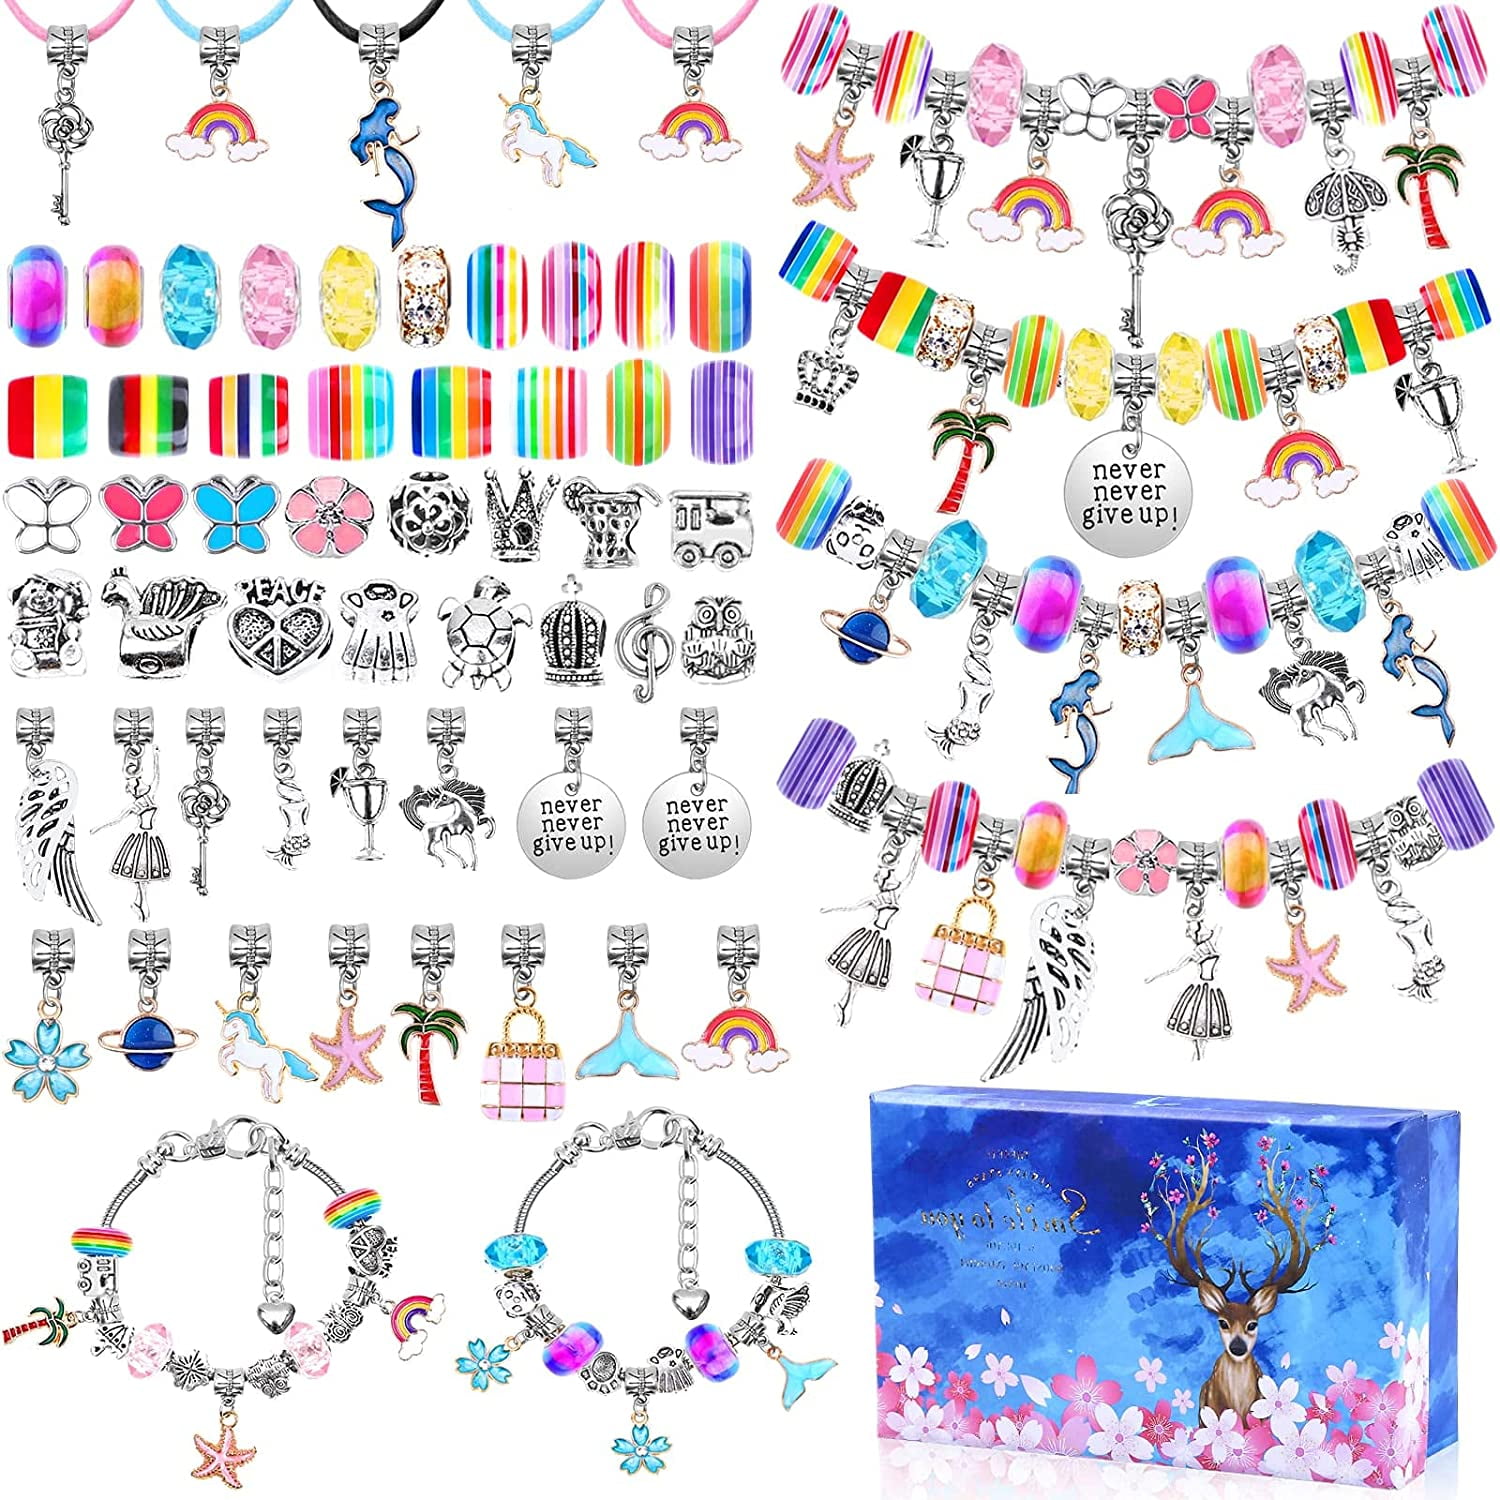 52 Pieces Charm Bracelet Making Kit Including Colorful Crystal Beads  Bracelet Charms Gift Diy Craft Jewelry For Girls Kids Teens Bracelet Making  Beads